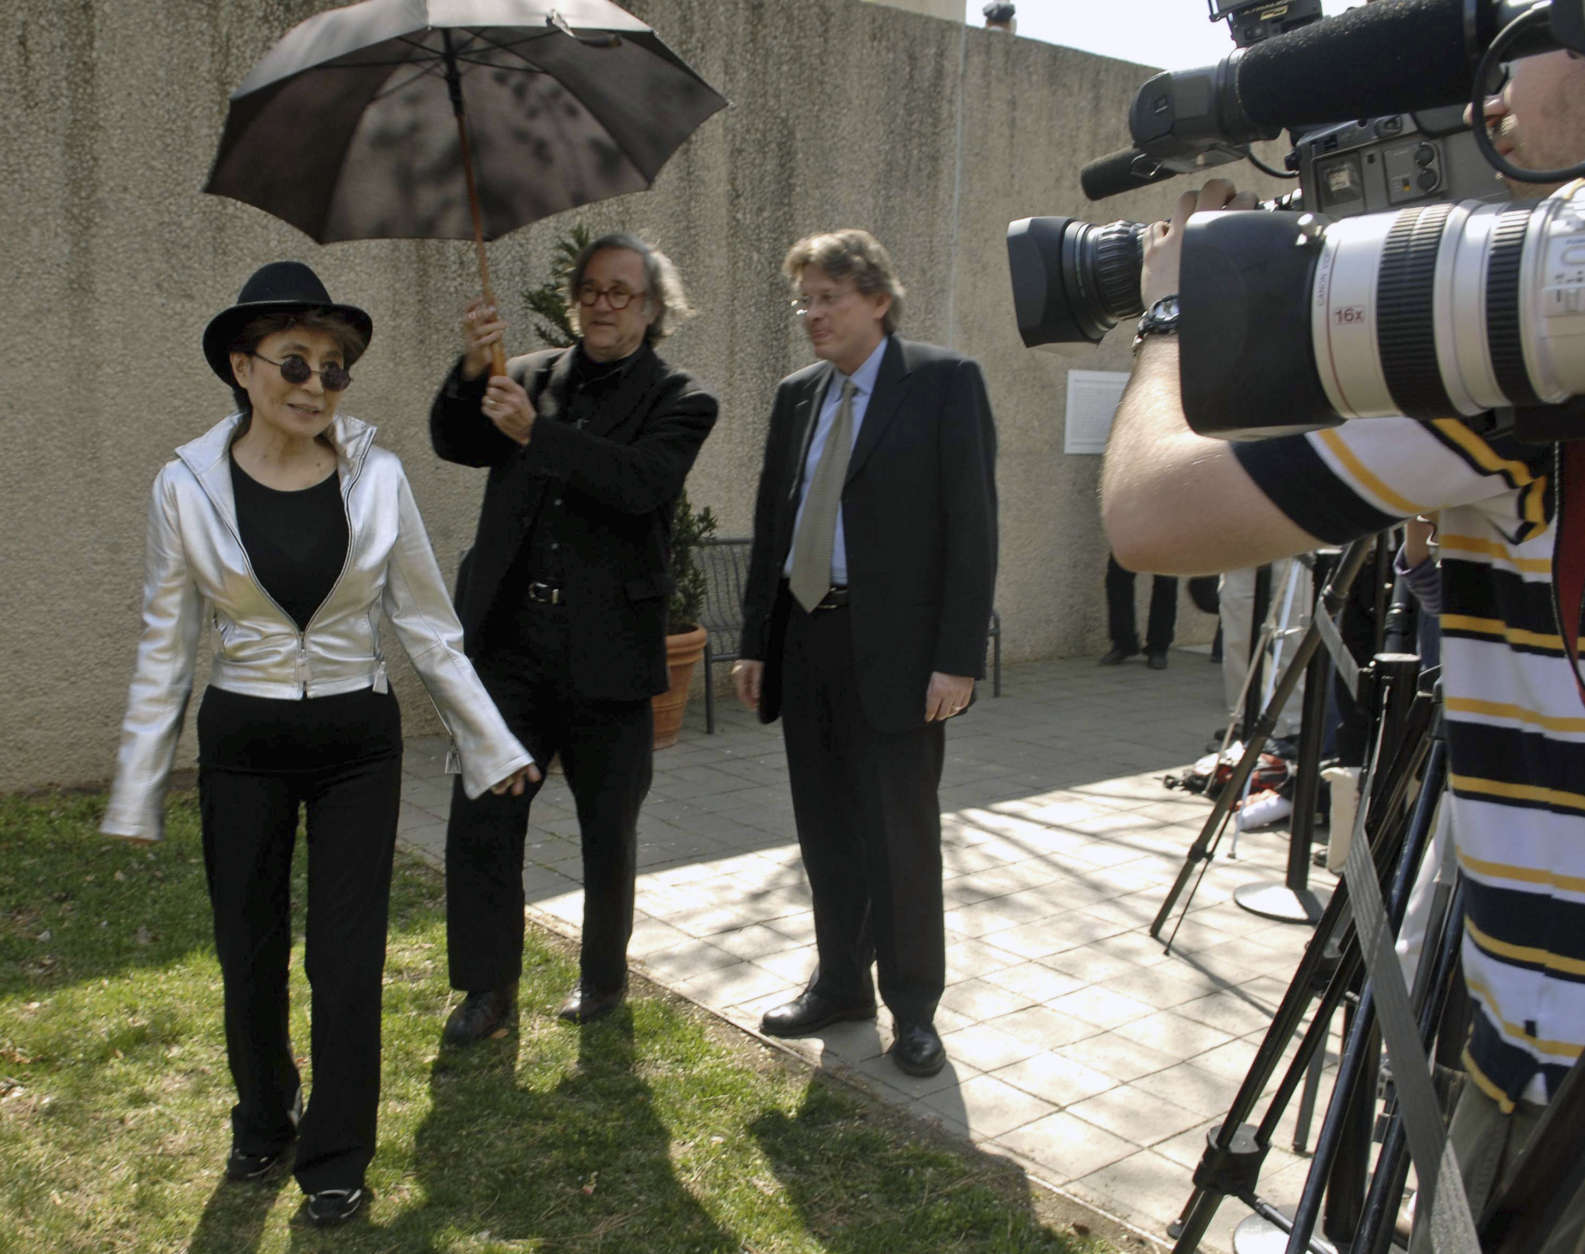 Yoko Ono, left, walks past the press before dedicating the "Wish Tree for Washington D.C." at the Hirshhorn Museum and Sculpture Garden on Monday, April 2, 2007, in Washington. (AP Photo/Kevin Wolf)